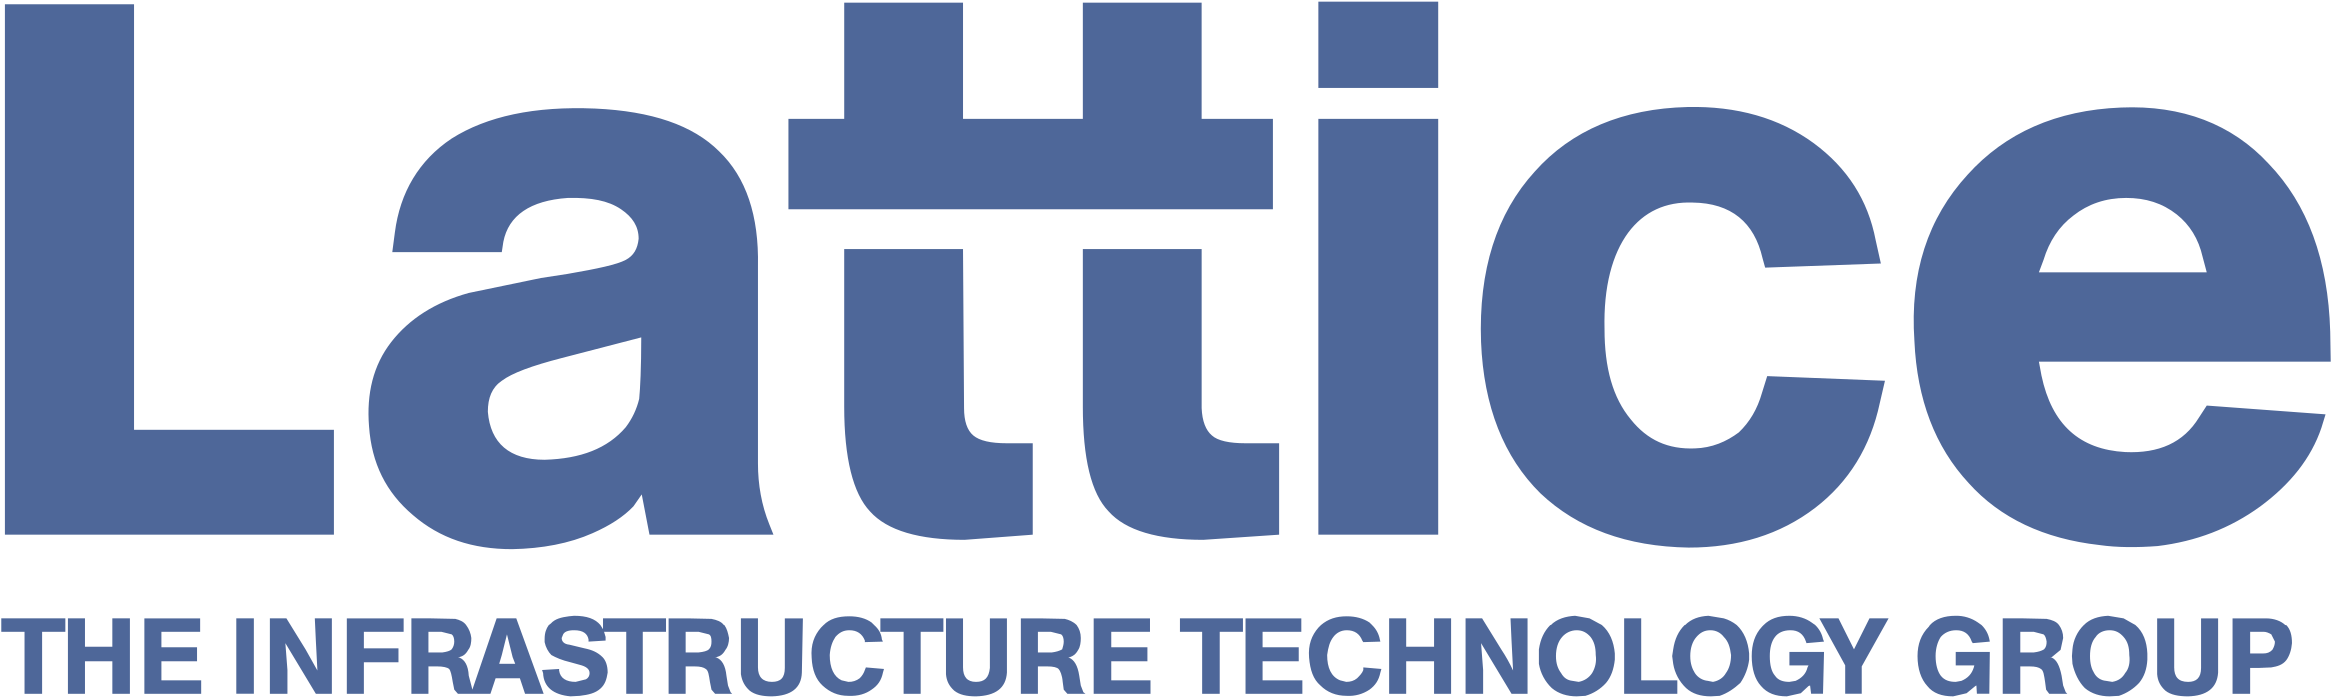 Lattice Infrastructure Technology Group Logo PNG image